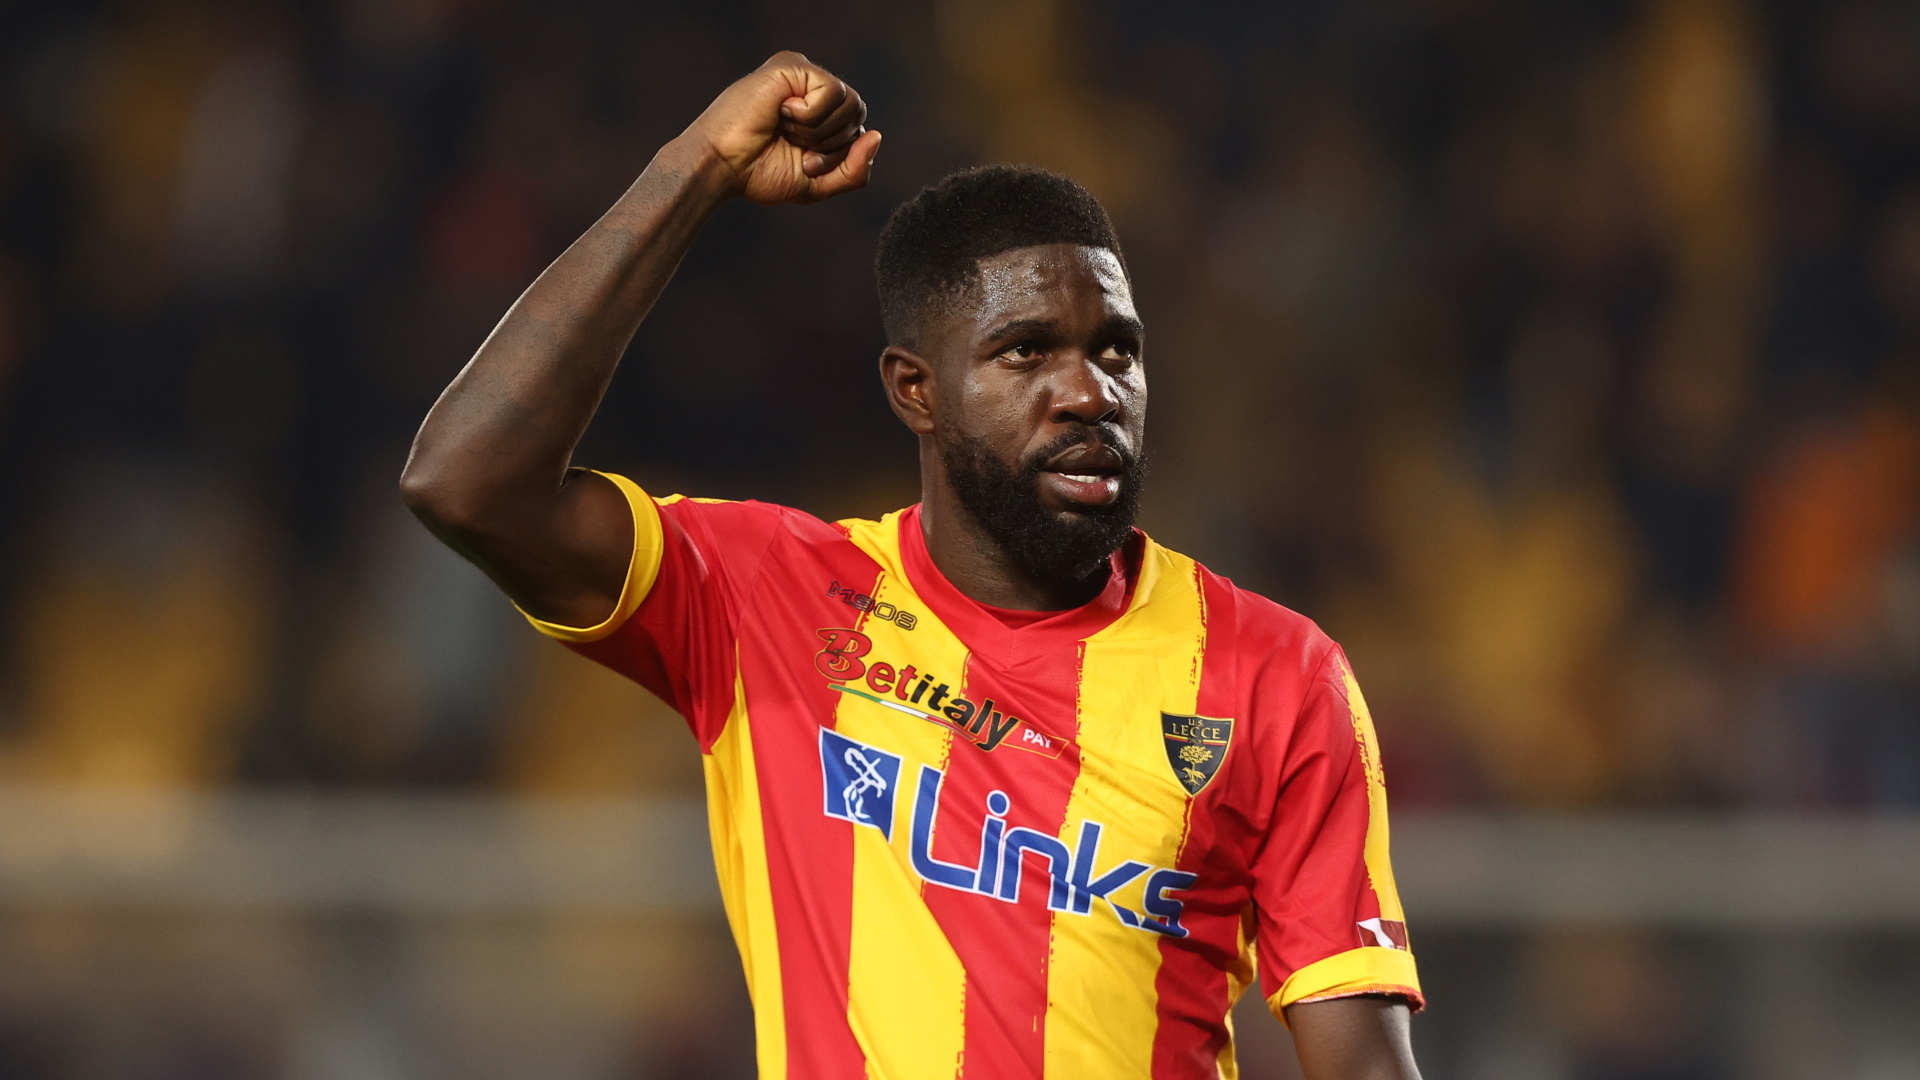 Wednesday’s game between Lecce and Lazio was briefly halted in the second half as the opposing fans targeted Samuel Umtiti with racist chants.